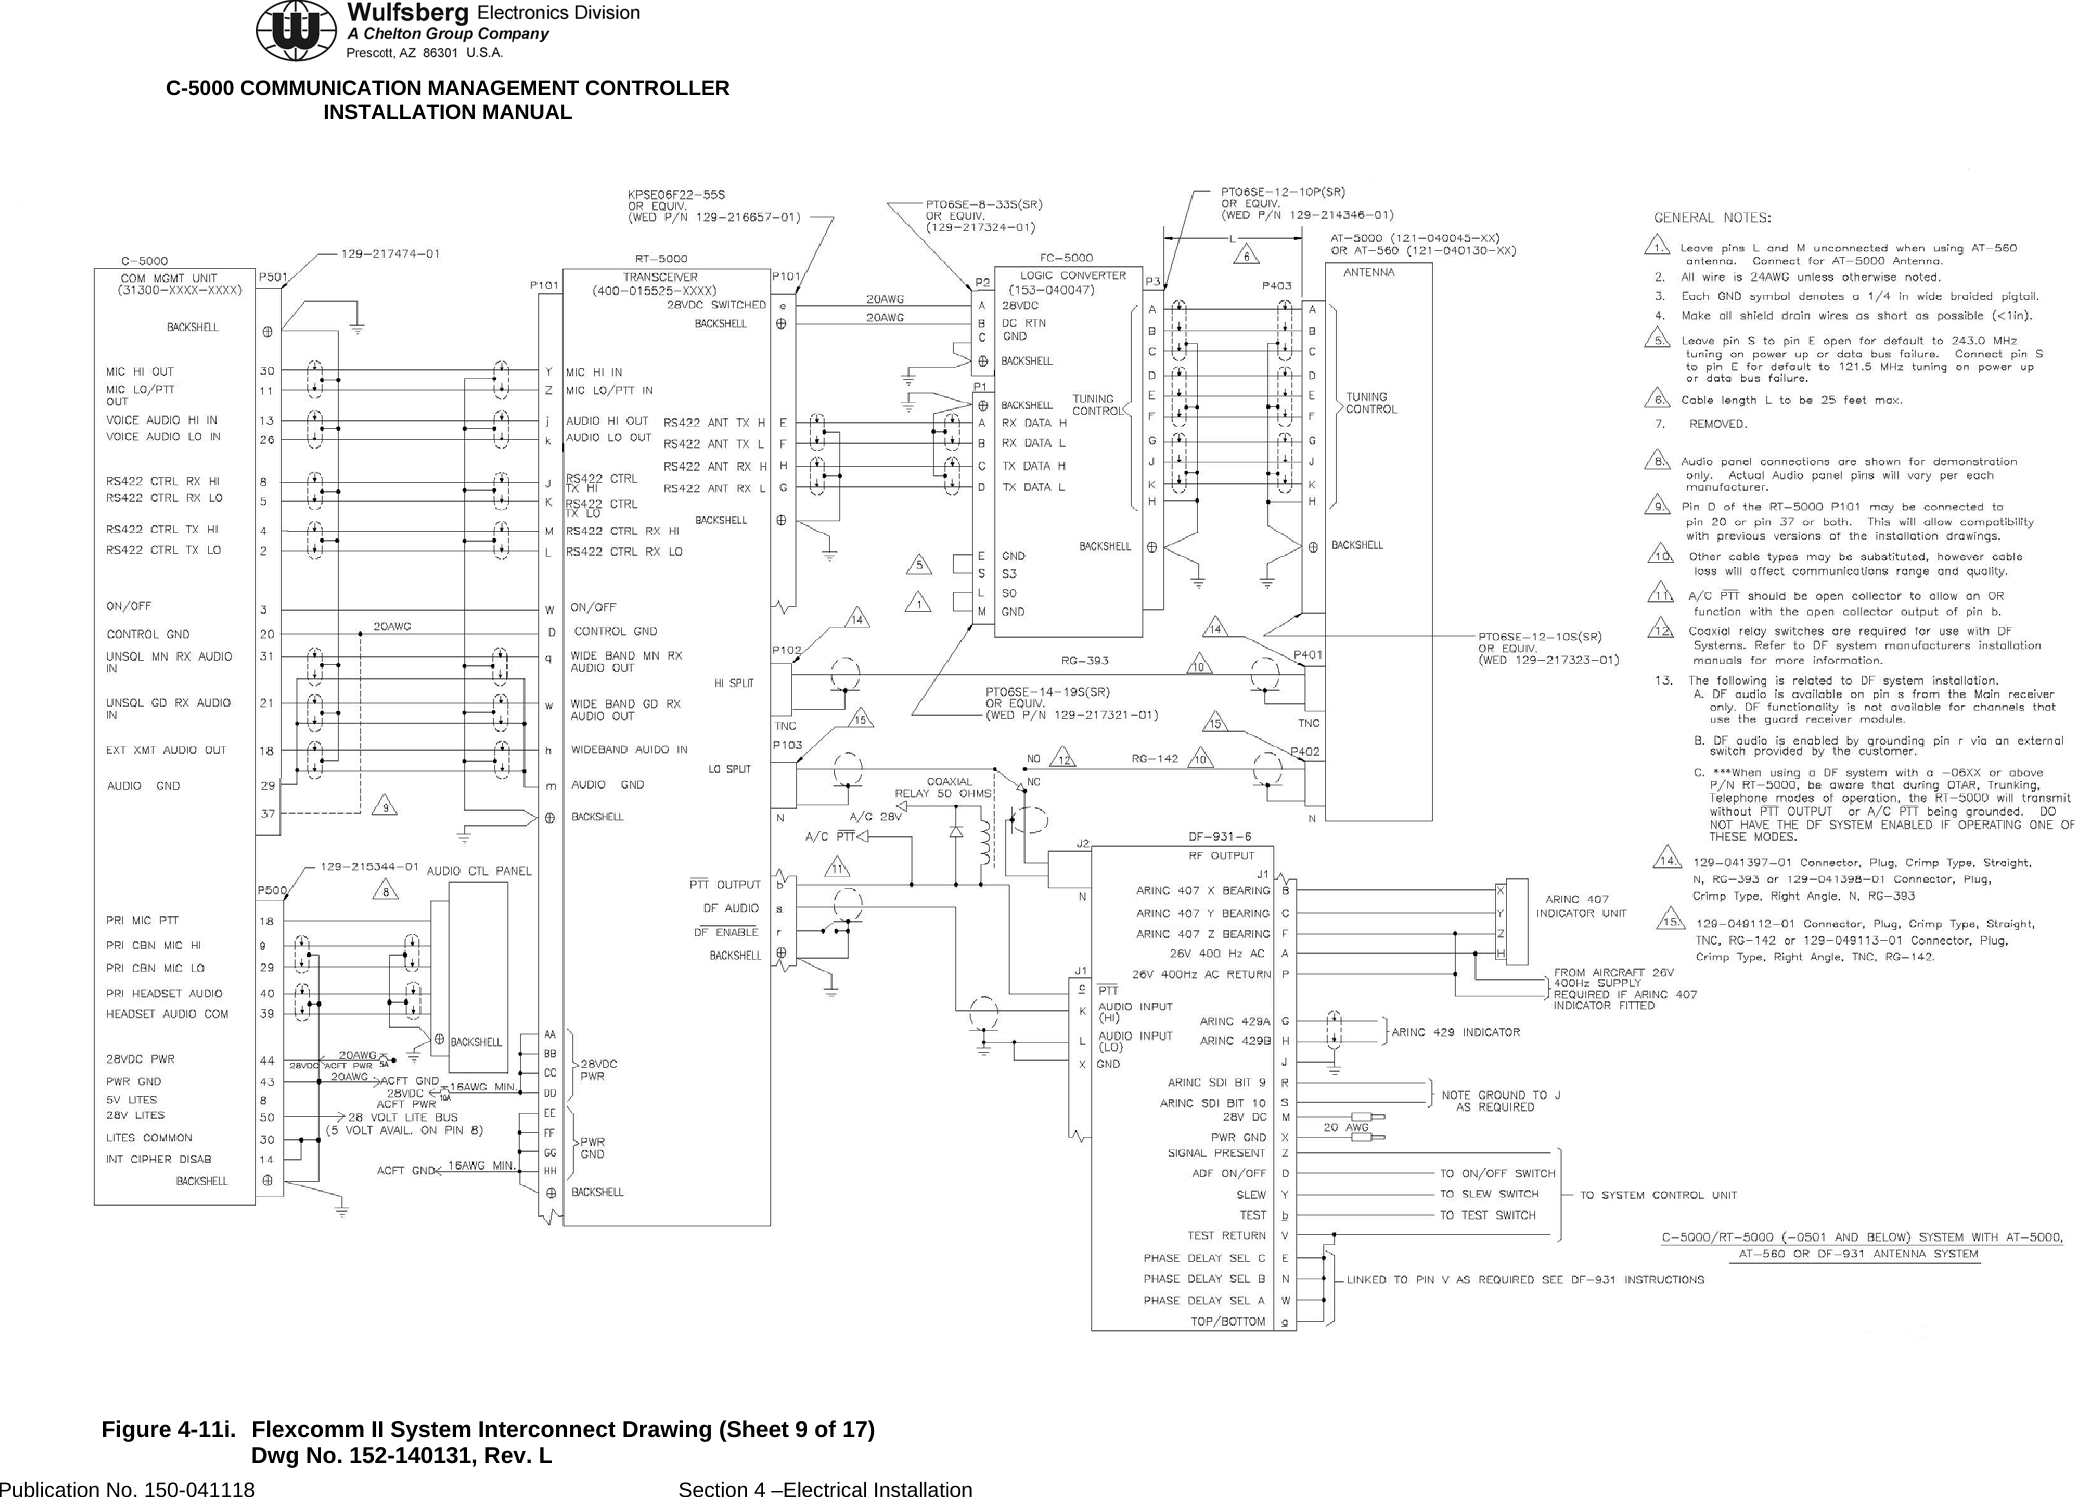  C-5000 COMMUNICATION MANAGEMENT CONTROLLER INSTALLATION MANUAL  Figure 4-11i.  Flexcomm II System Interconnect Drawing (Sheet 9 of 17) Dwg No. 152-140131, Rev. L Publication No. 150-041118  Section 4 –Electrical Installation 